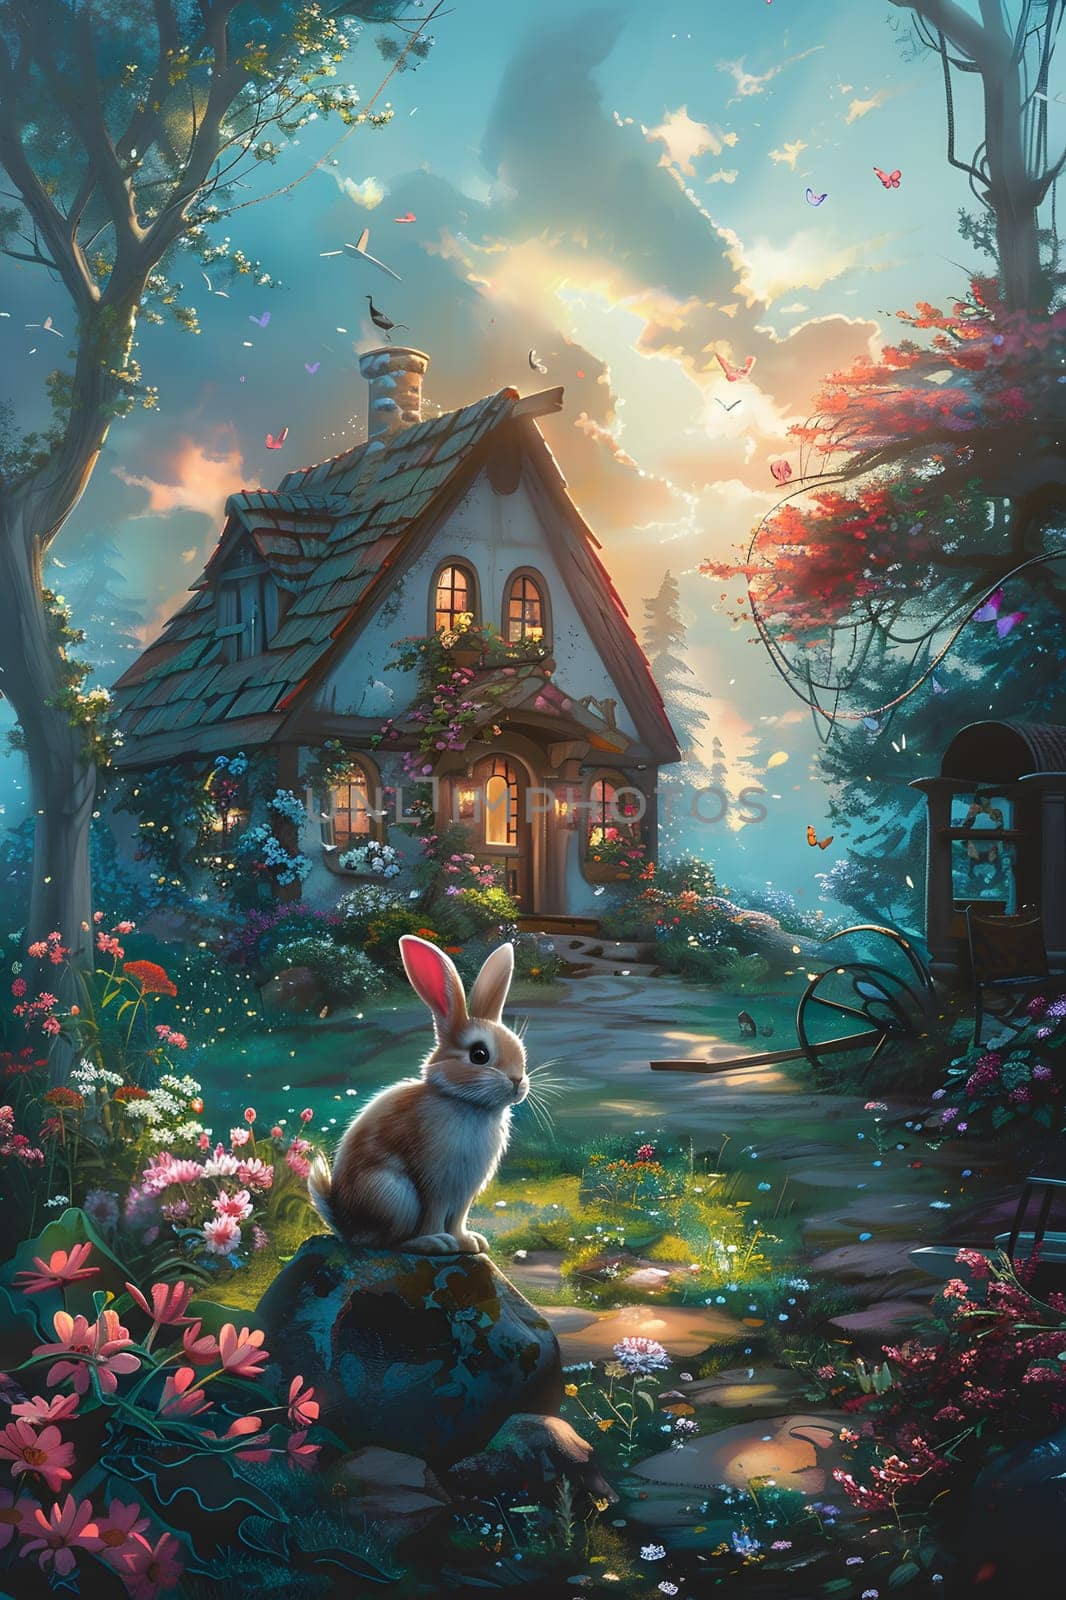 In the painting, a rabbit rests on a rock by a house under the sky by Nadtochiy